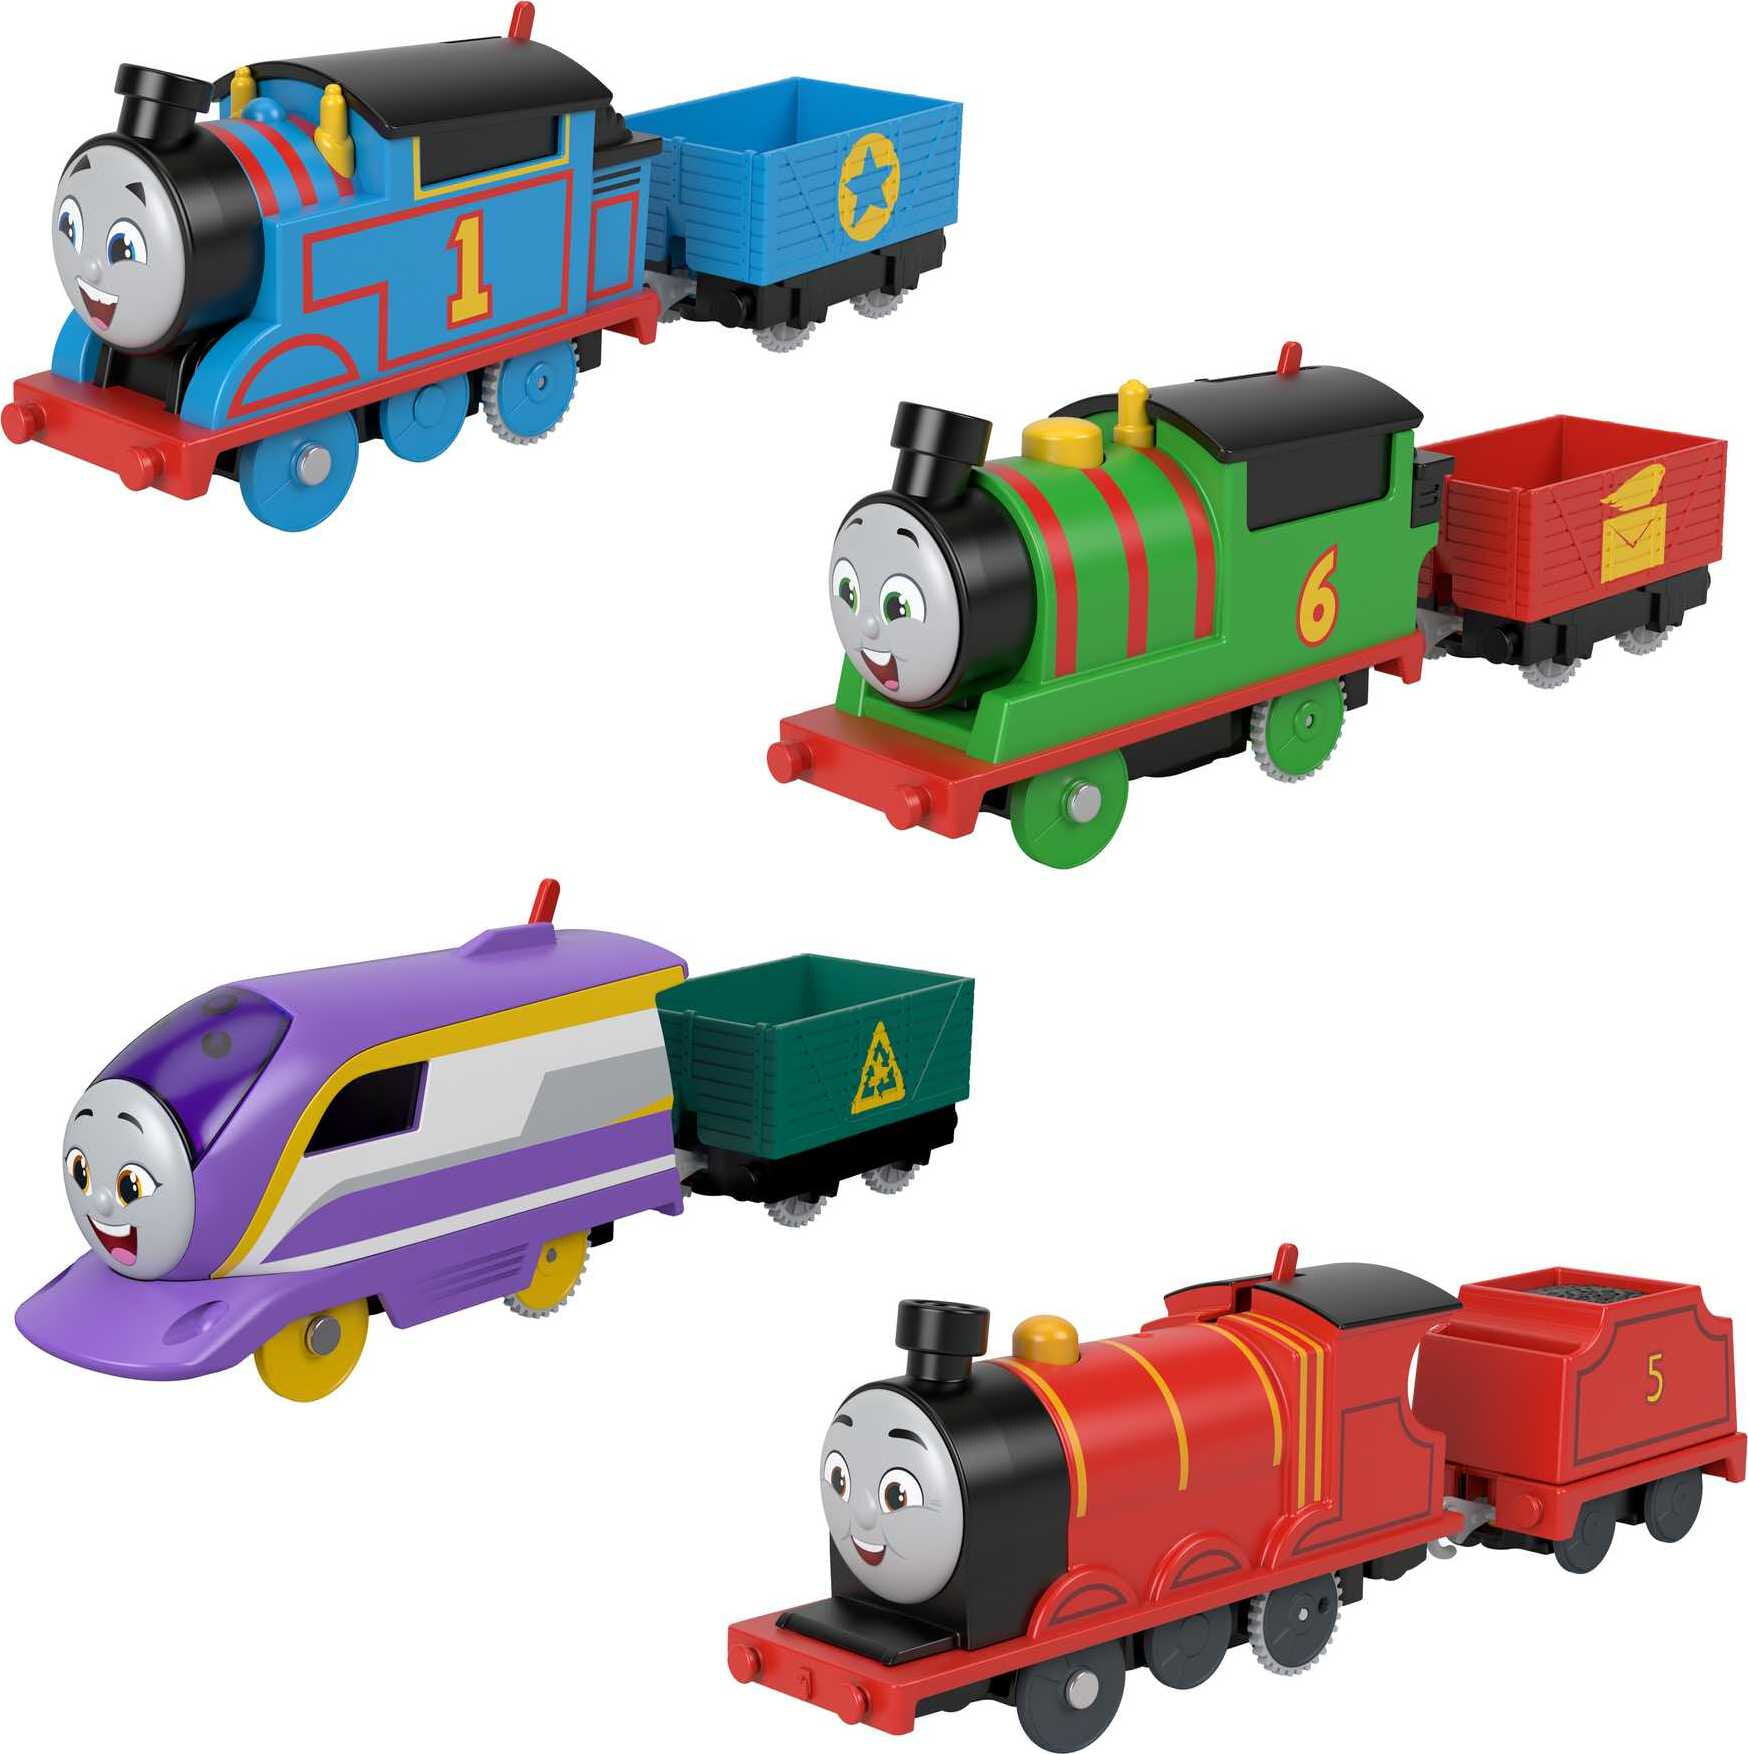 & Kana Motorized 4-Pack Train Engine Set for Preschool Kids Ages 3 and up Exclusive Nia Percy Thomas & Friends Thomas 